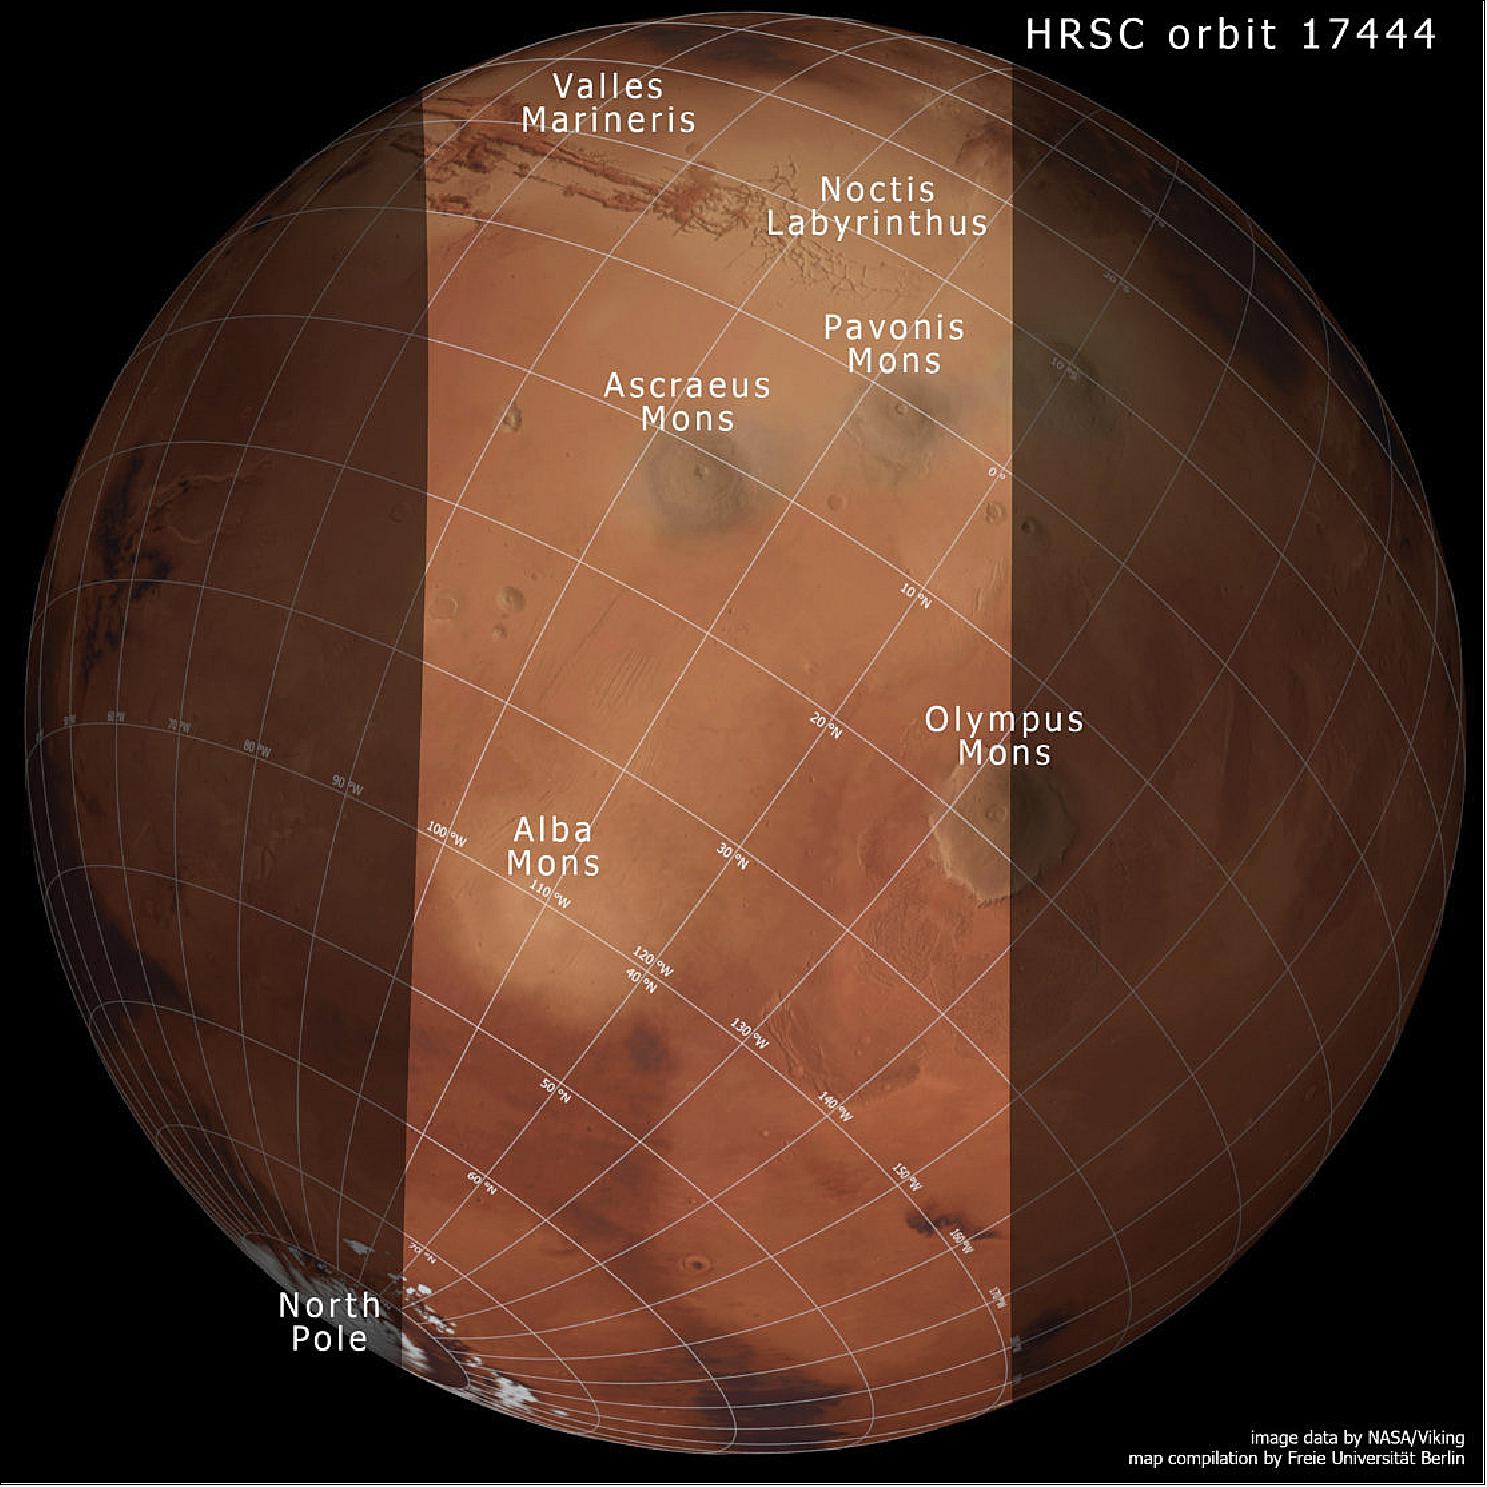 Figure 77: This map is based on data from NASA’s Viking mission. It shows the slice of Mars captured by the HRSC aboard ESA’s Mars Express spacecraft to celebrate the mission’s 15th anniversary: the intriguing and once-active Tharsis province. Included in this labelled view is the extensive canyon system of Valles Marineris, the web-like system of fissures comprising Noctis Labyrinthus, four volcanoes, and the northern polar cap (image credit: NASA/Viking, FU Berlin) 36)